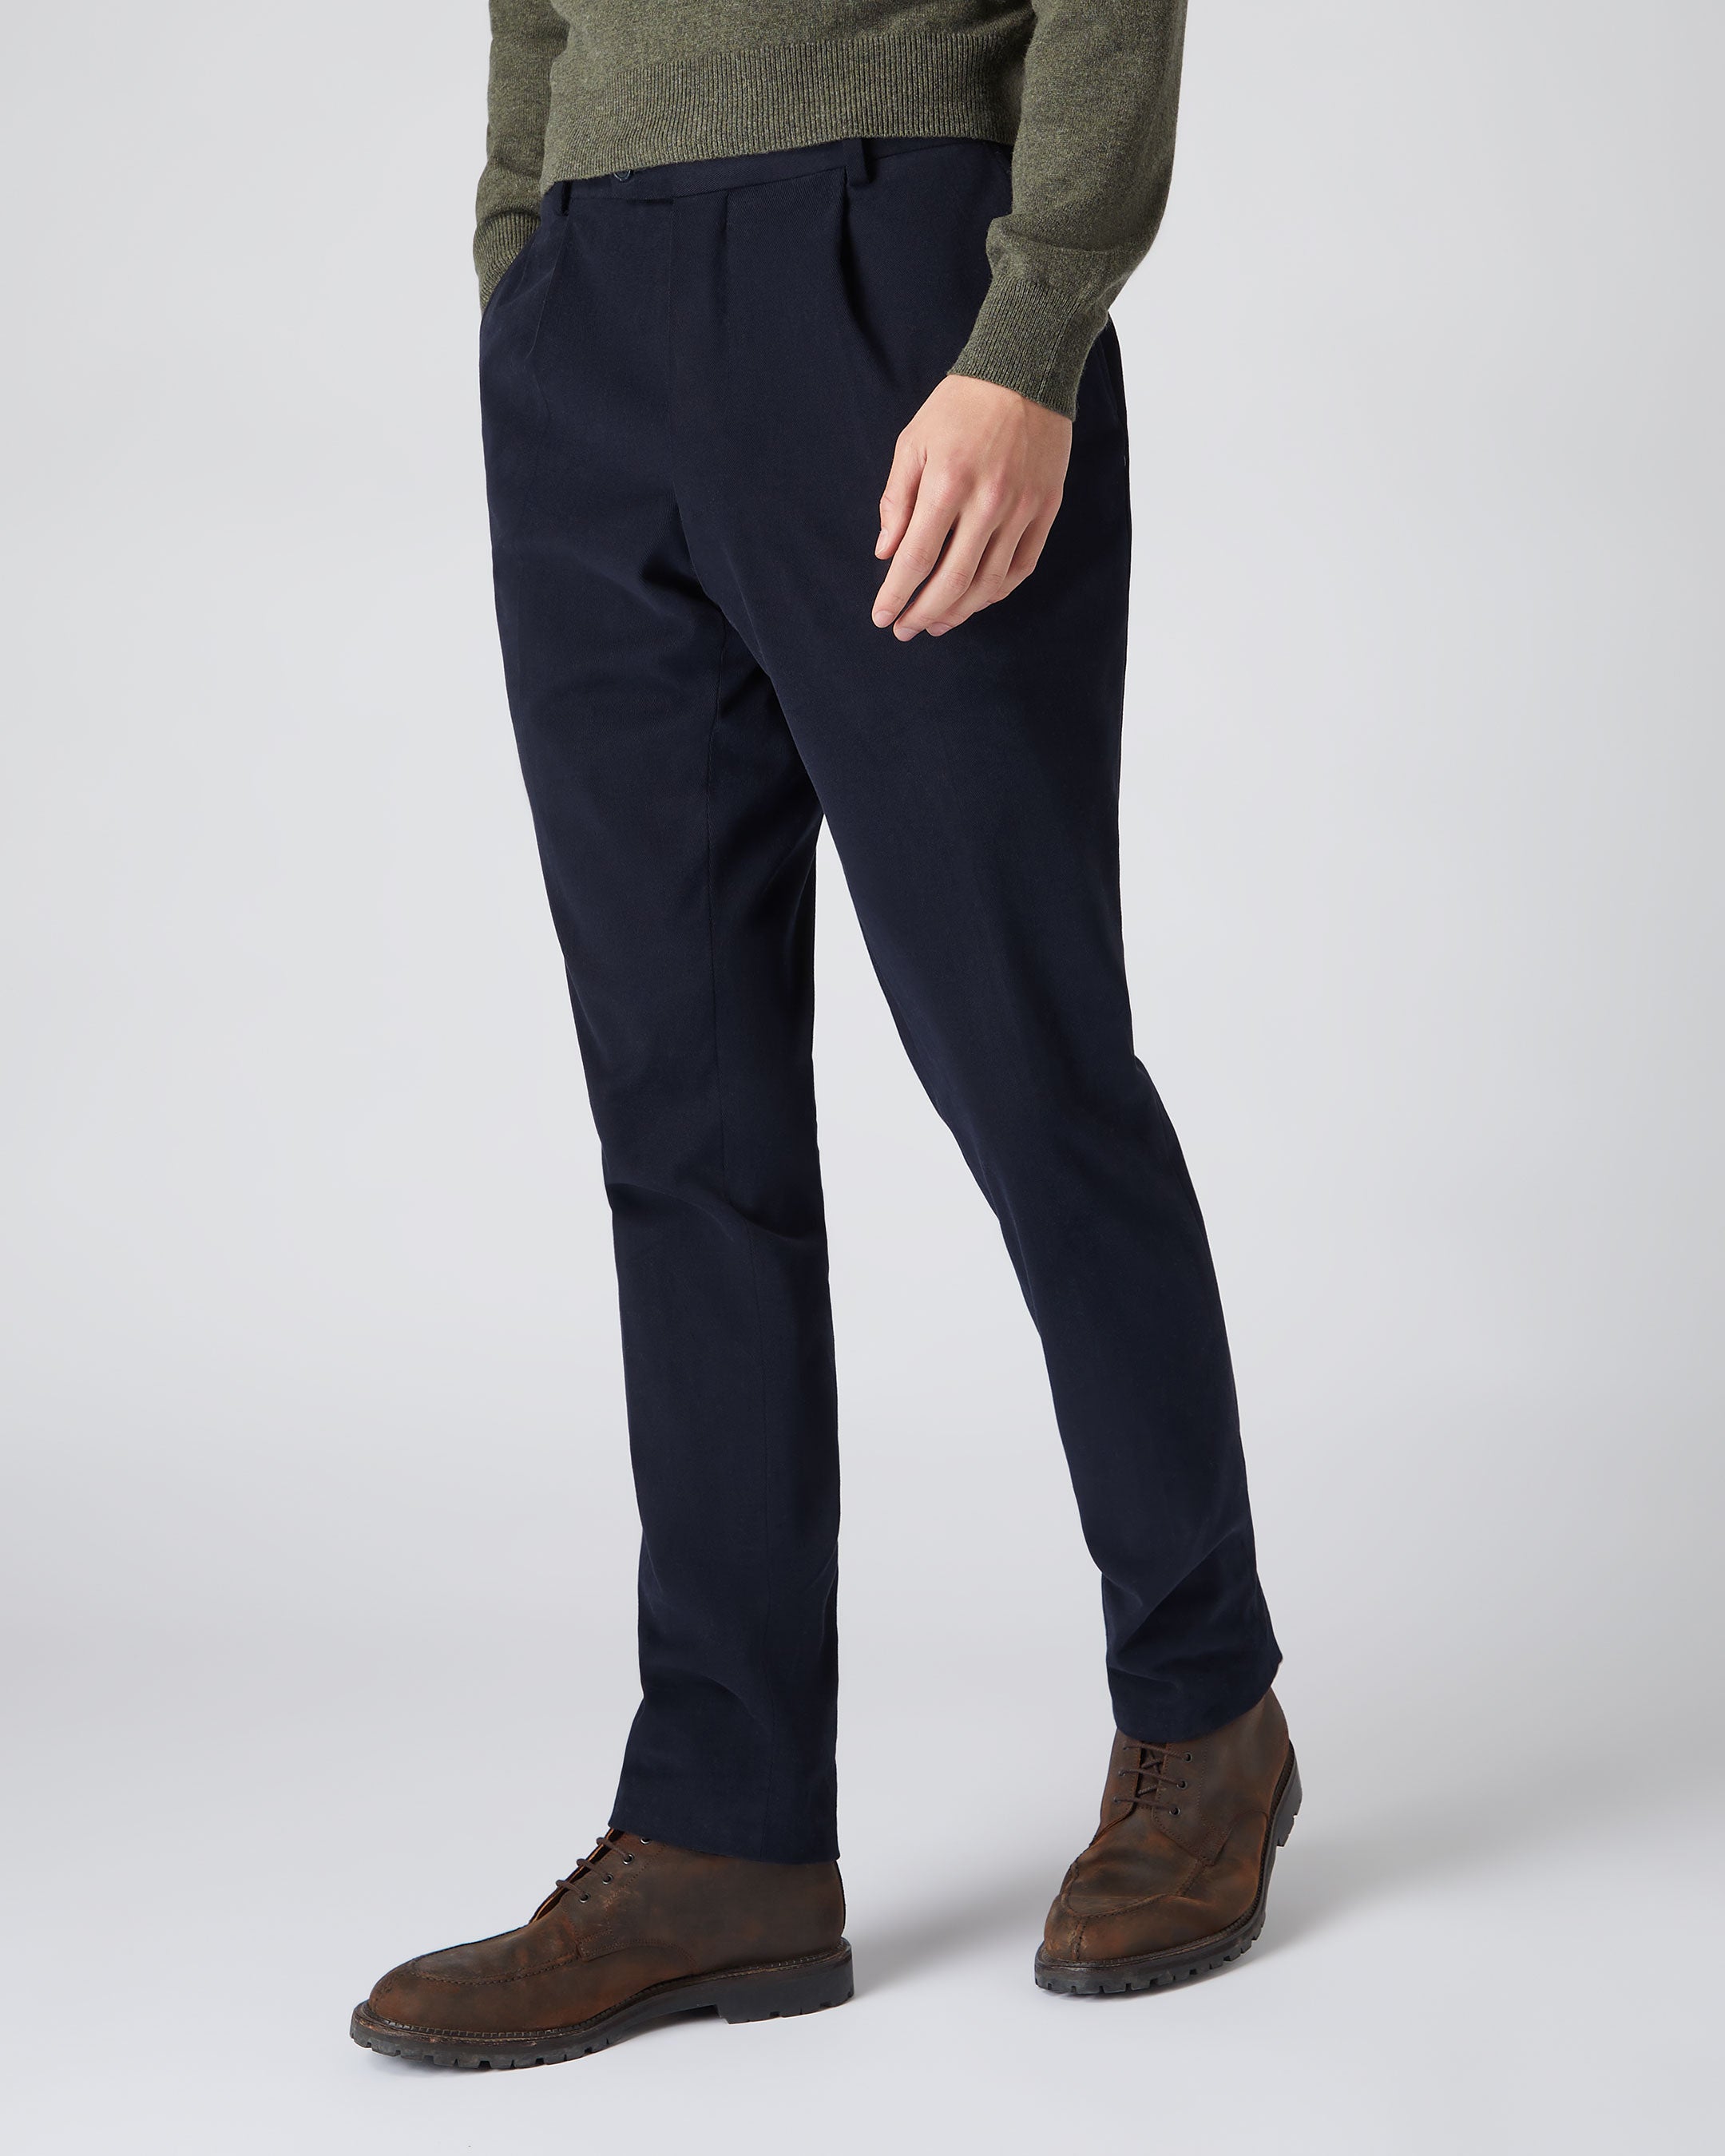 Buy Men's Cotton Mercerised Solid Black Trousers | Cotstyle